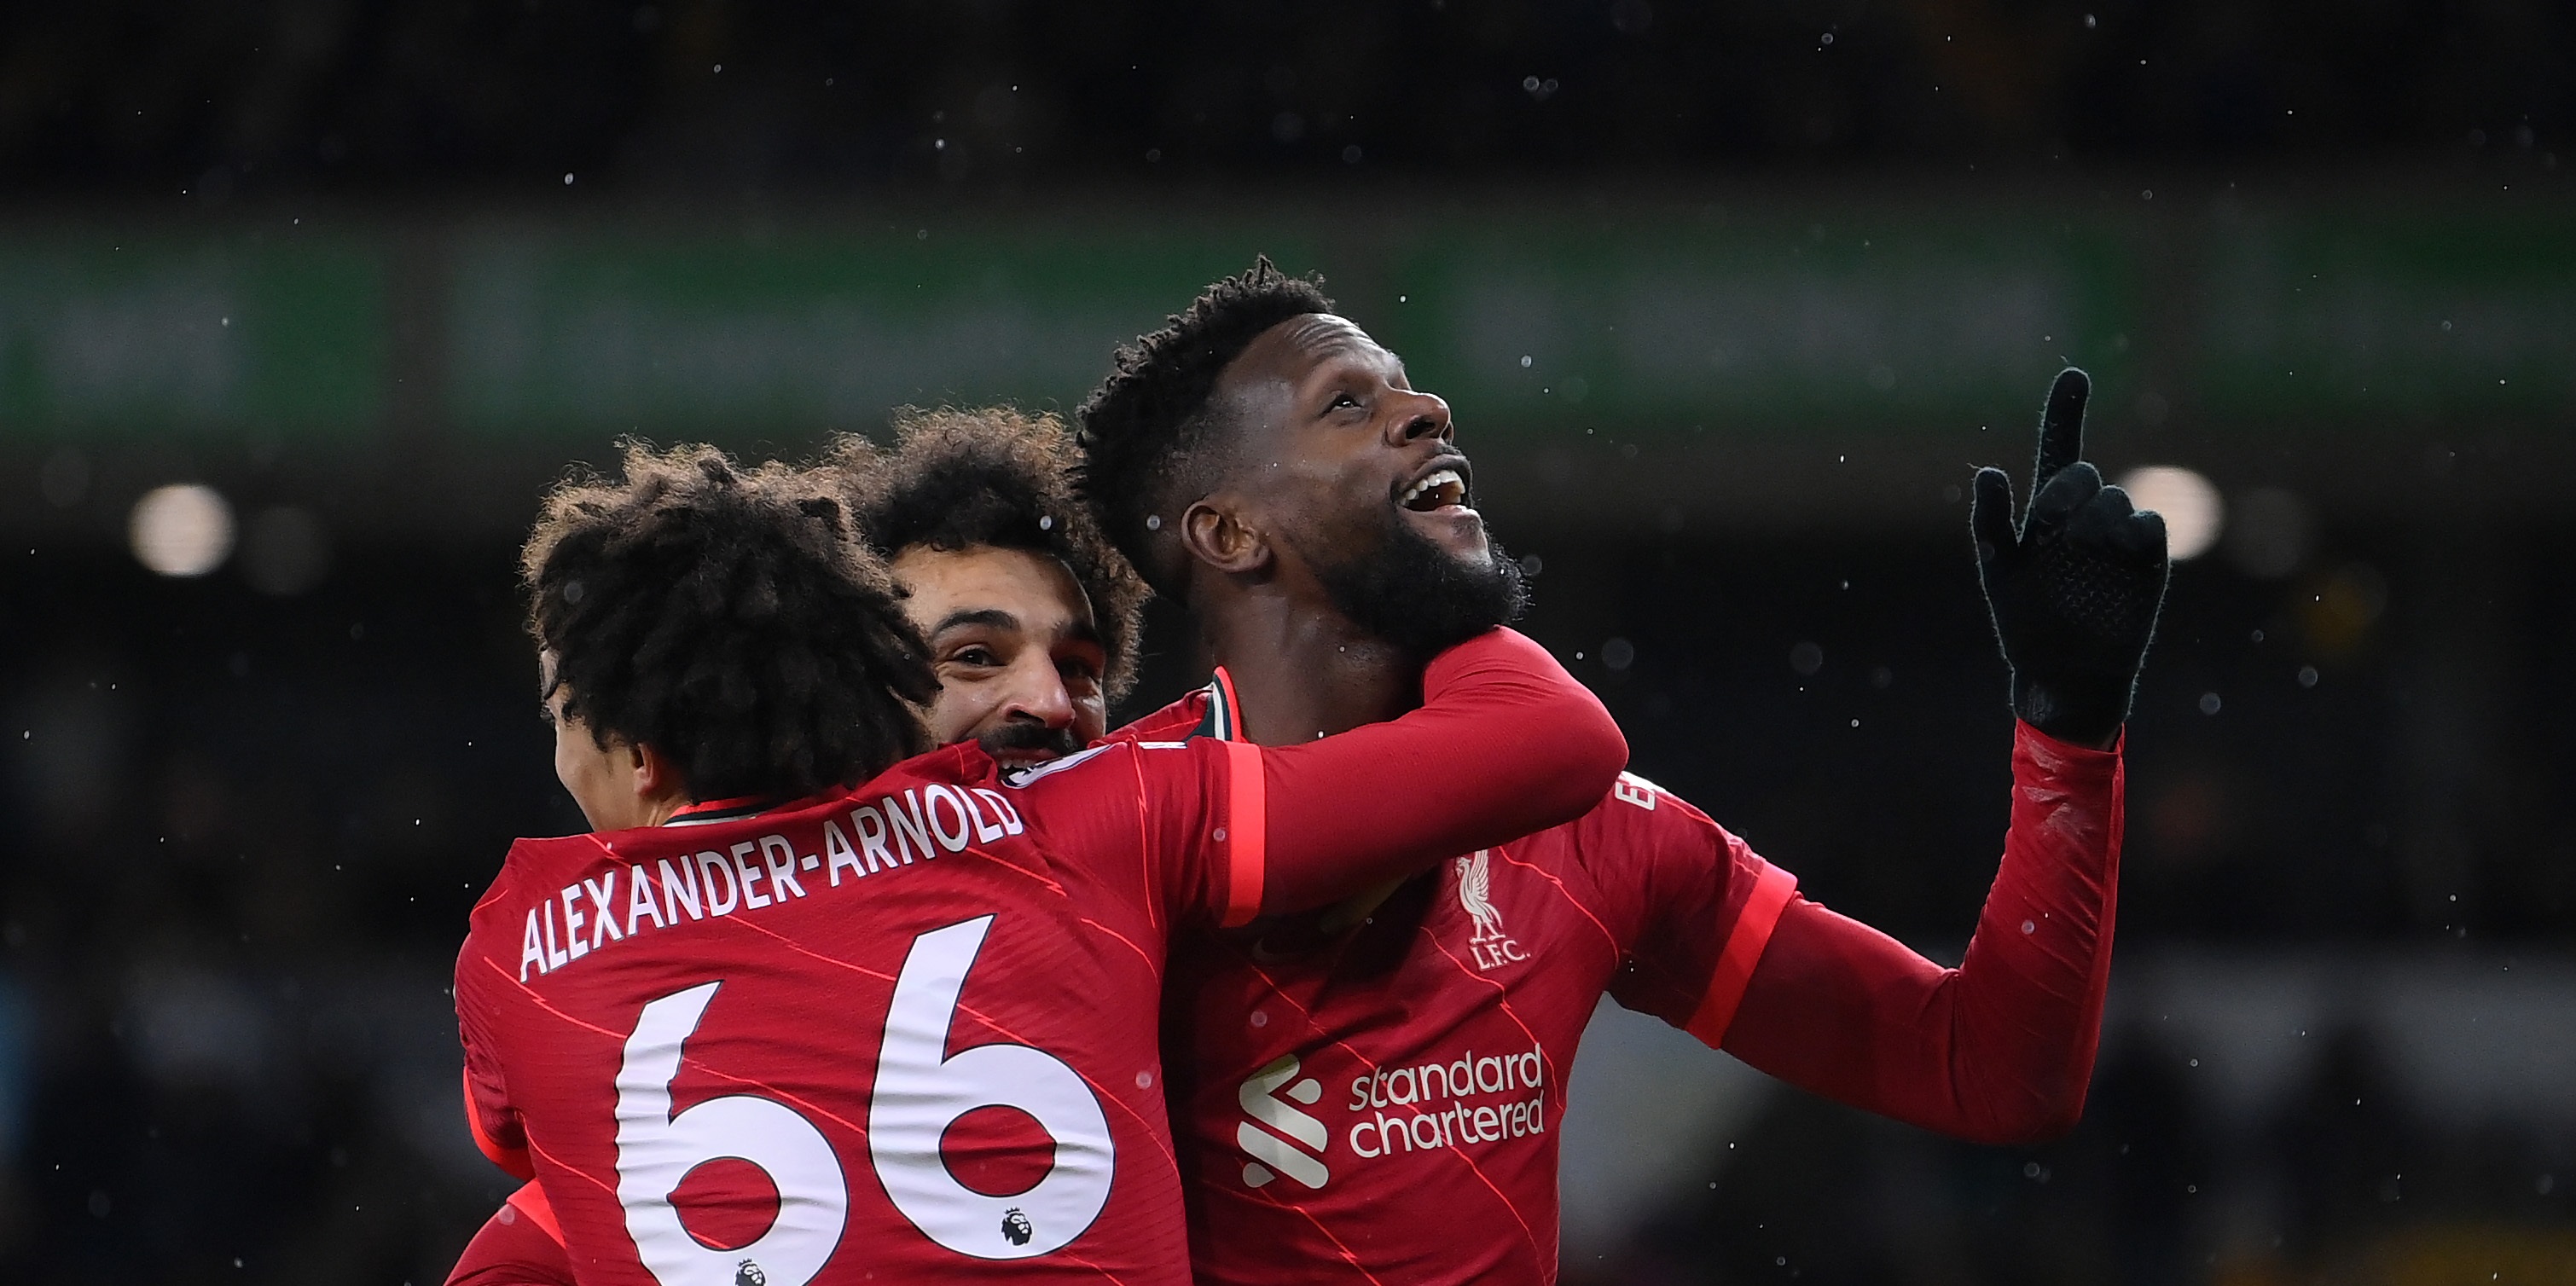 ‘Would take something special’ – James Pearce shares latest update on Divock Origi’s Liverpool future